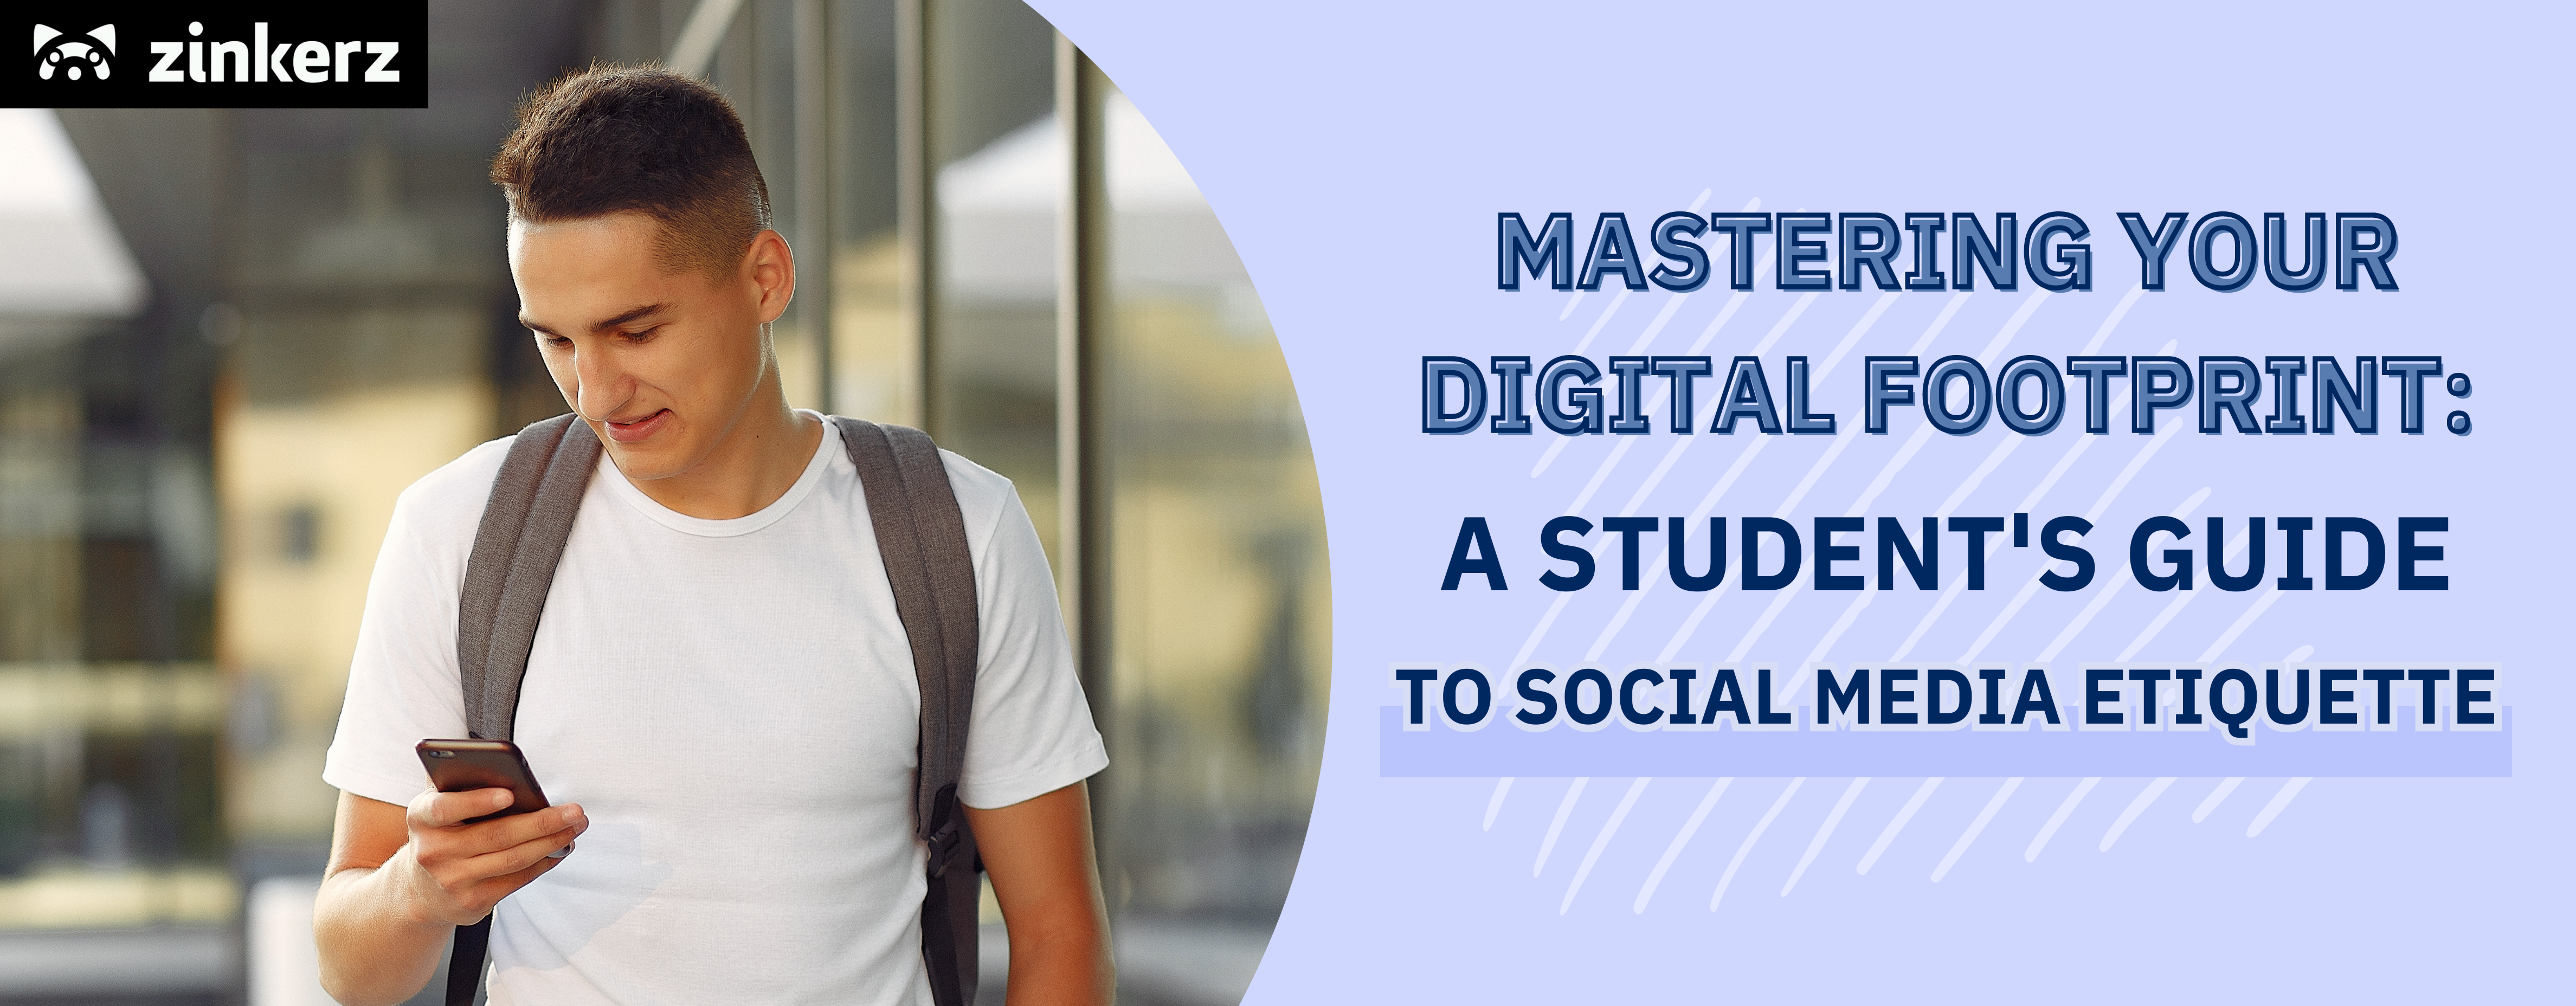 Mastering Your Digital Footprint: A Student’s Guide to Social Media Etiquette